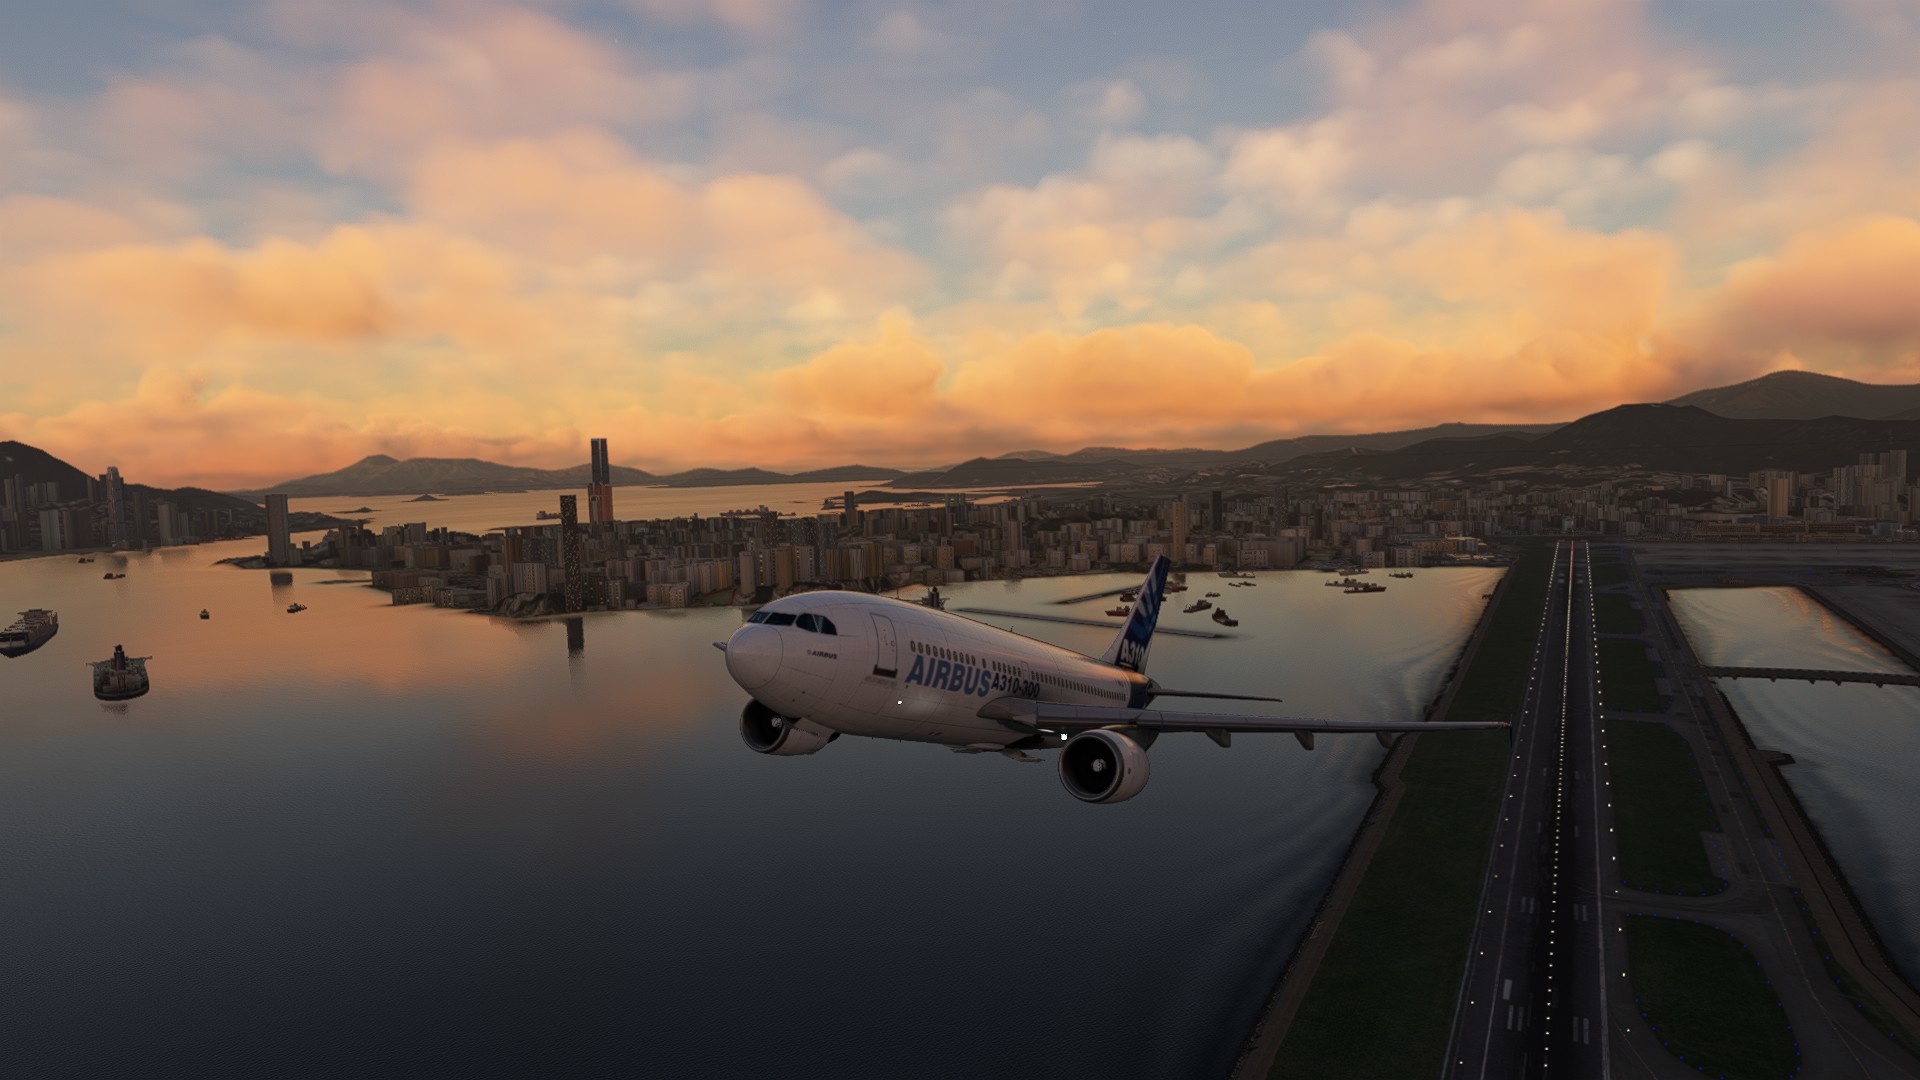 (The A310 was also a frequent guest in the real world at Hong Kong's old Kai Tak International Airport. It's great that the 40th Anniversary Update brings both classics together.)